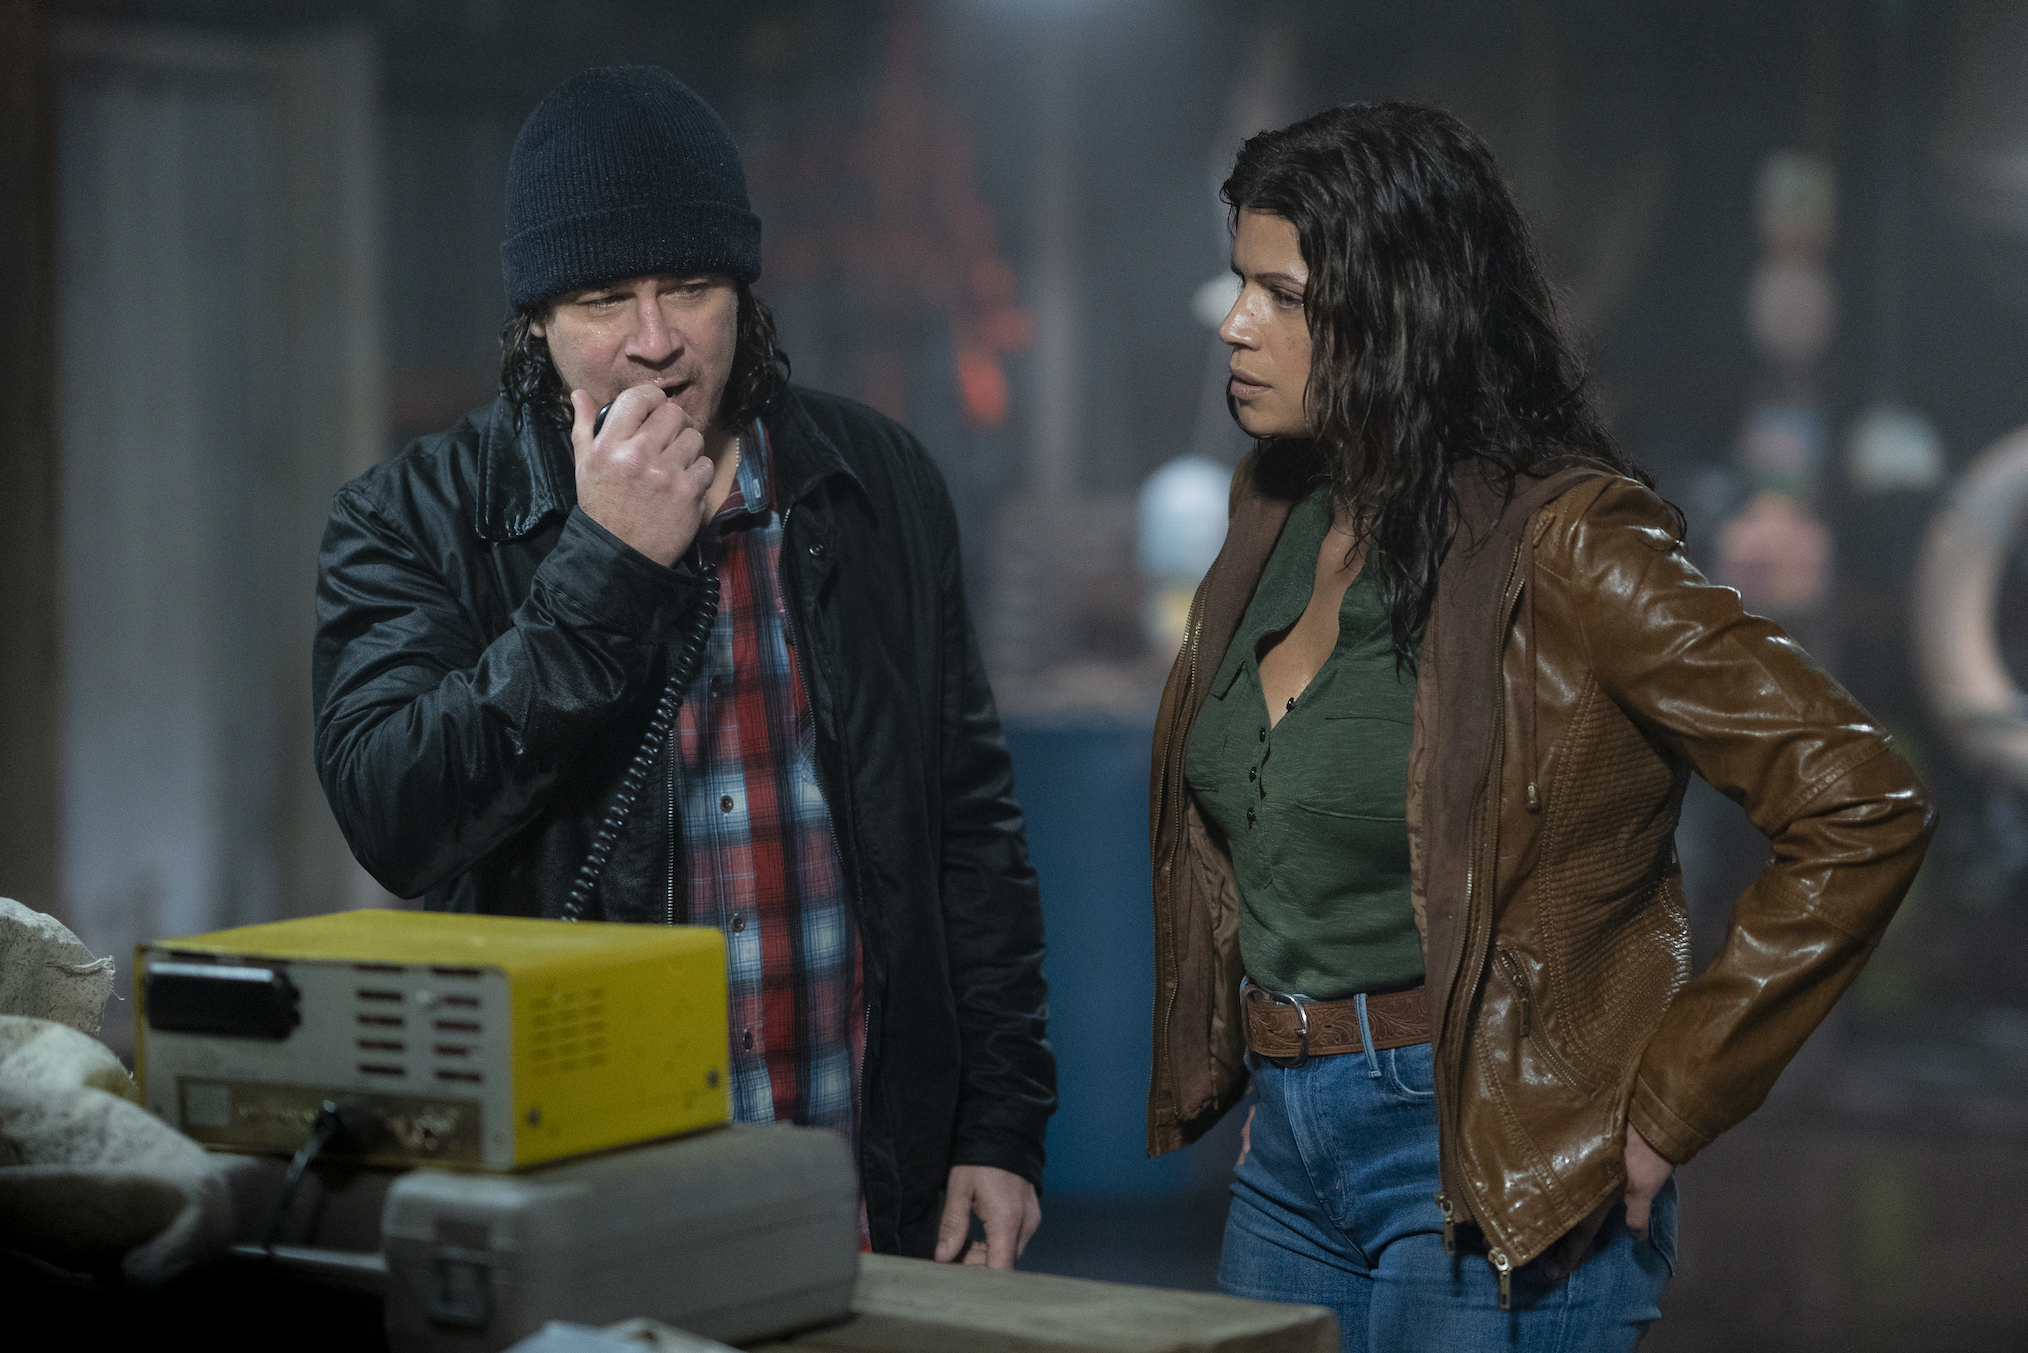 Christian Kane as Eliot, Andrea Navado as Maria in Leverage Redemption